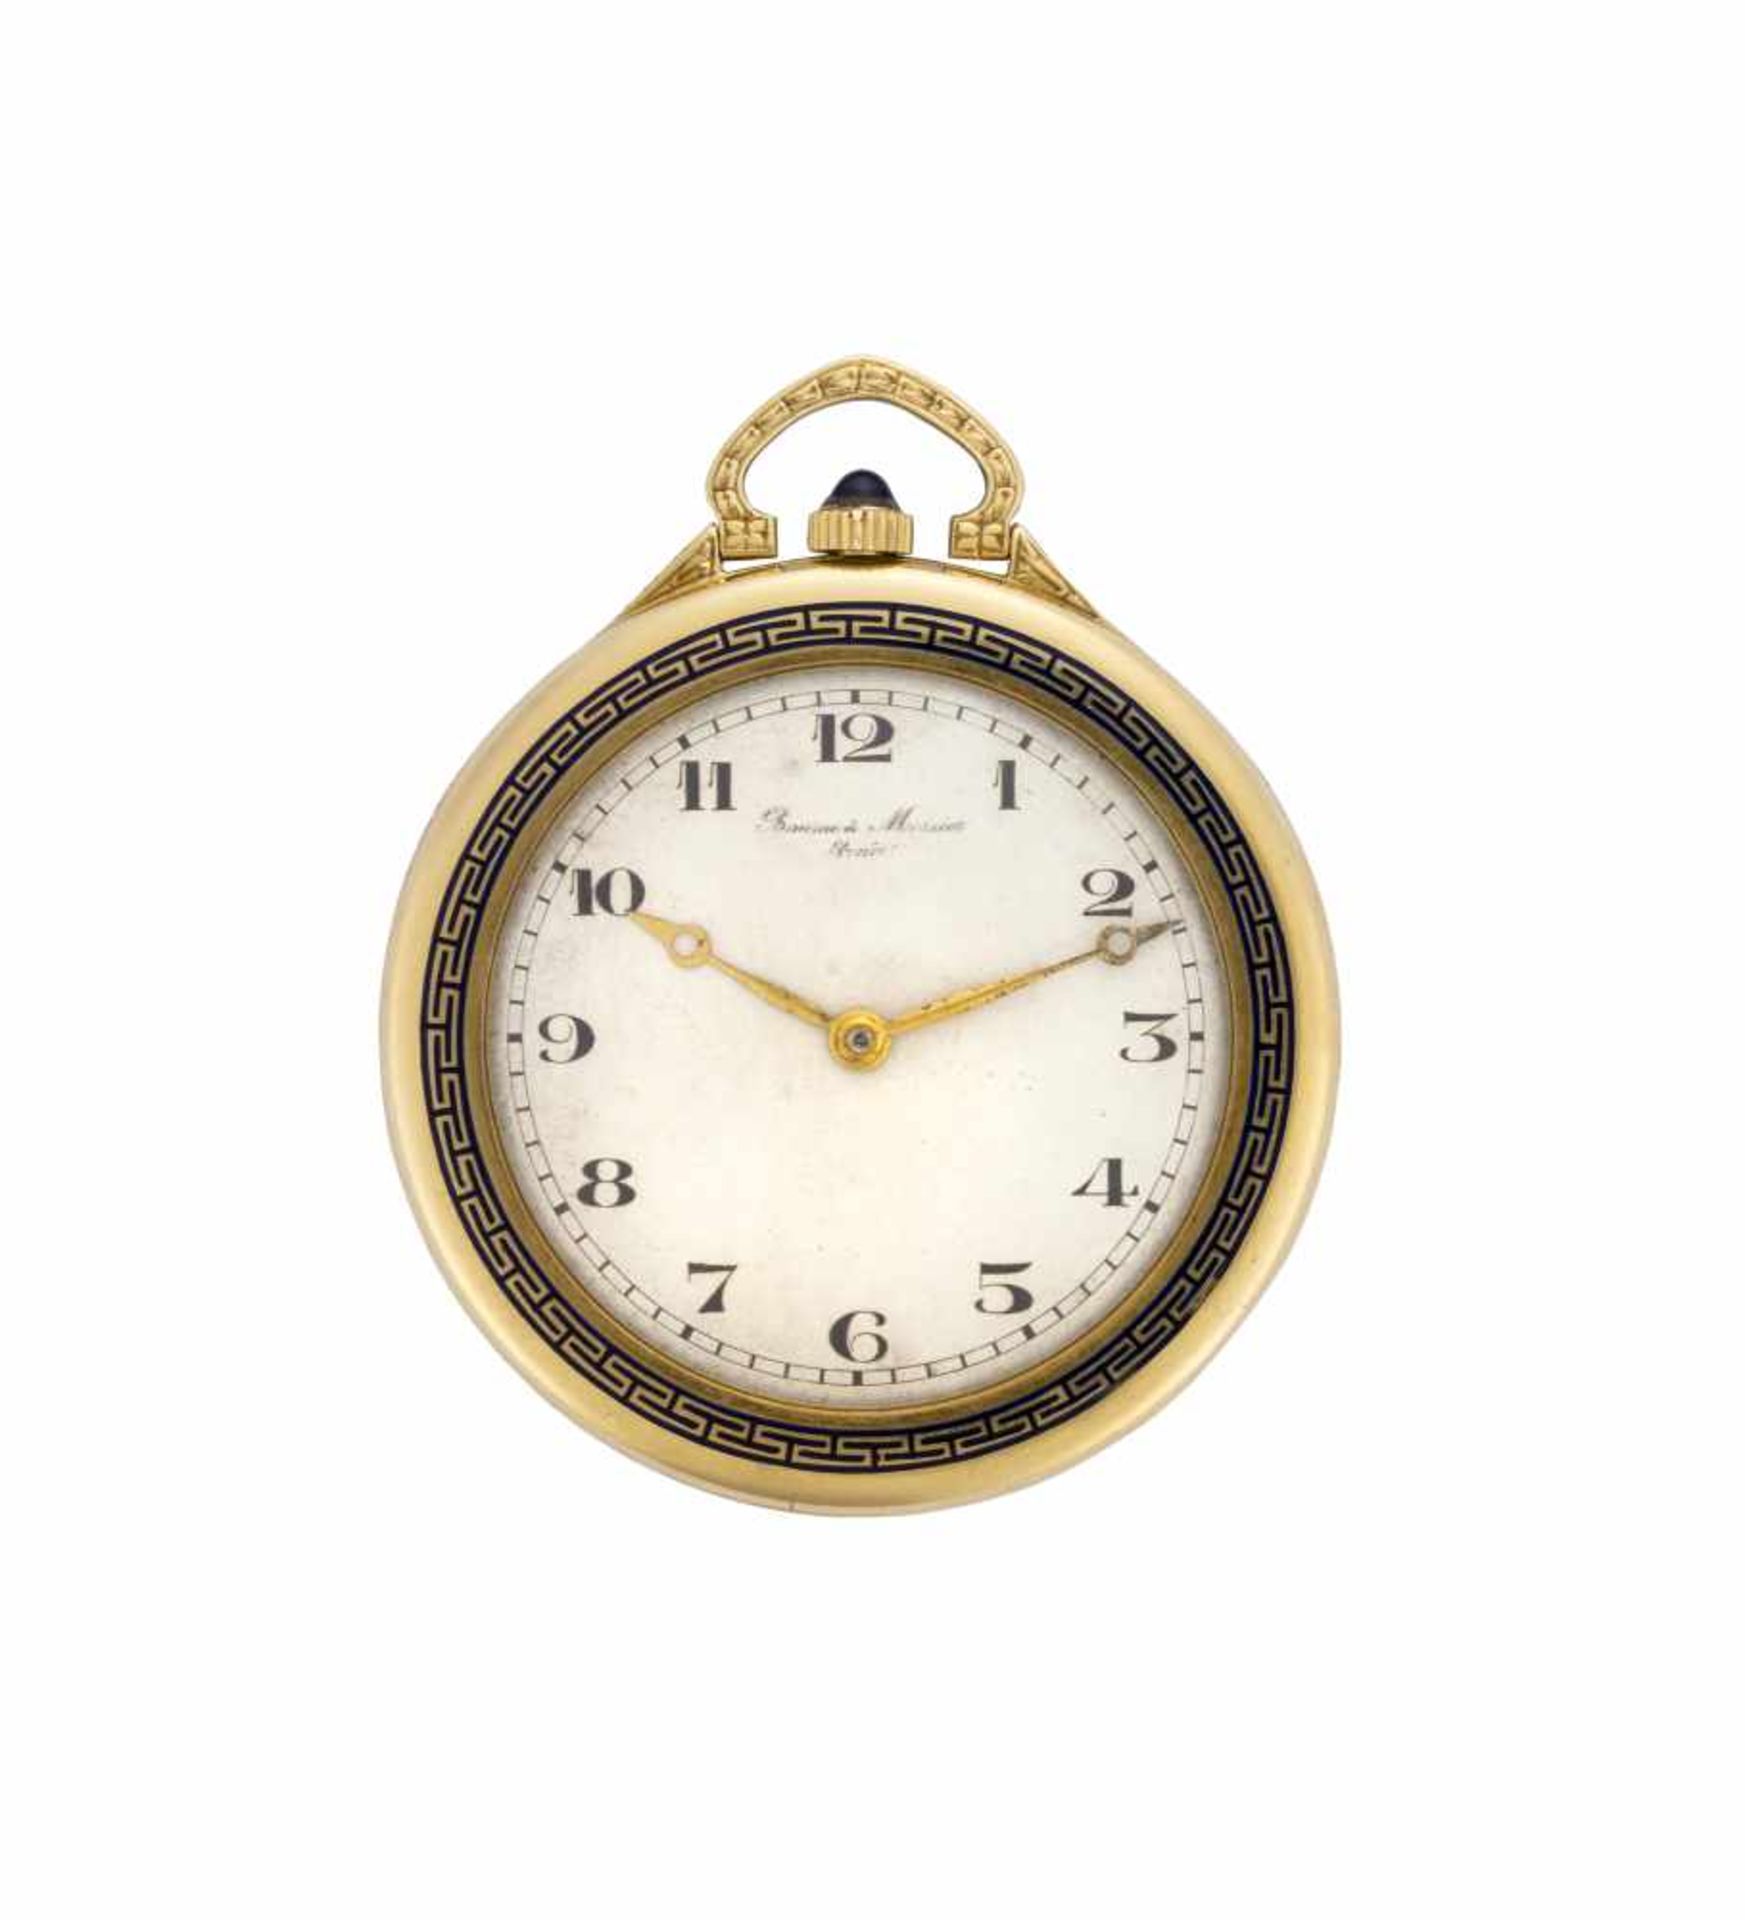 BAUME & MERCIER18K gold pocket watch with enamel decorationFirst half 20th centuryDial, movement and